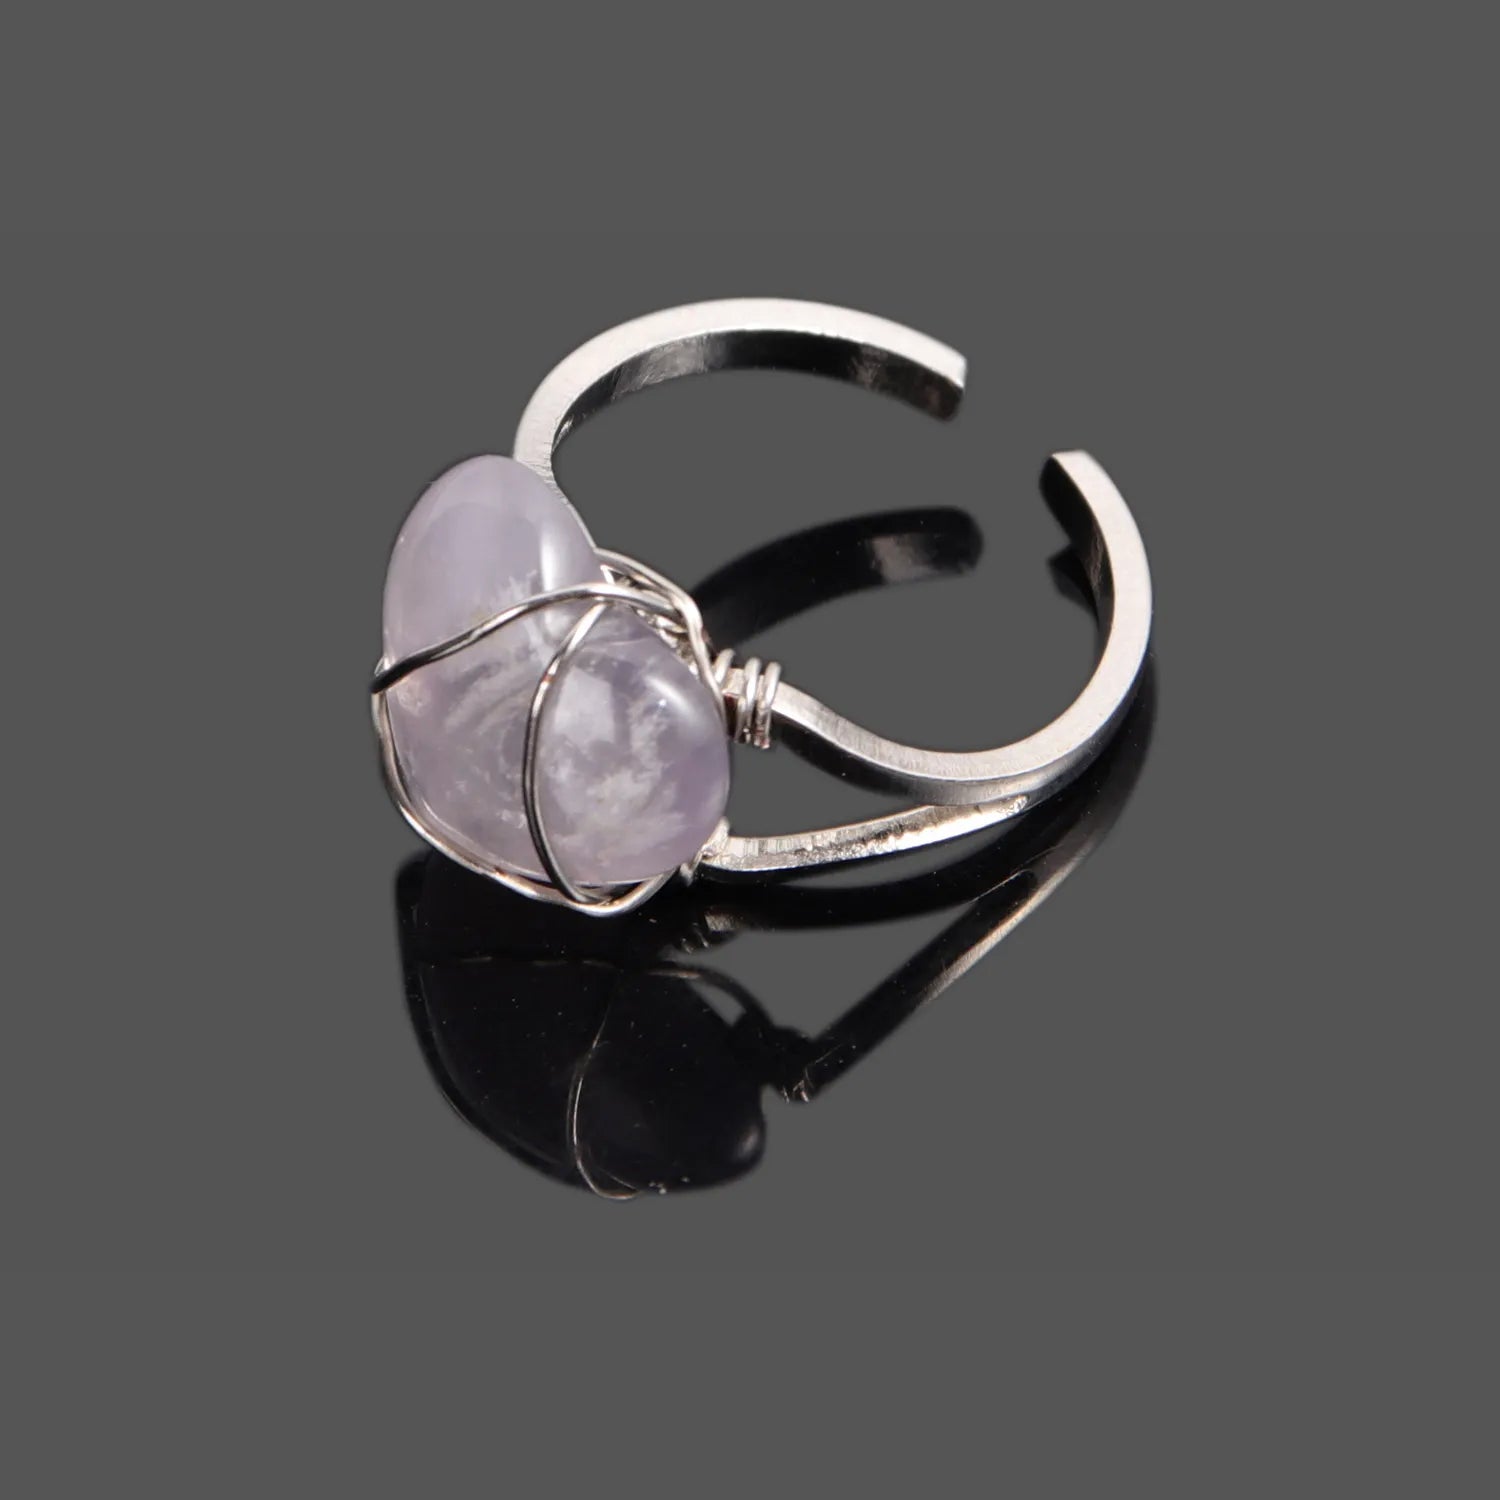 Ywg Stone Adjustable Natural Crystal Rings Heart-Shape Quartz Wire Winding Couple Exquisite Personality Ring